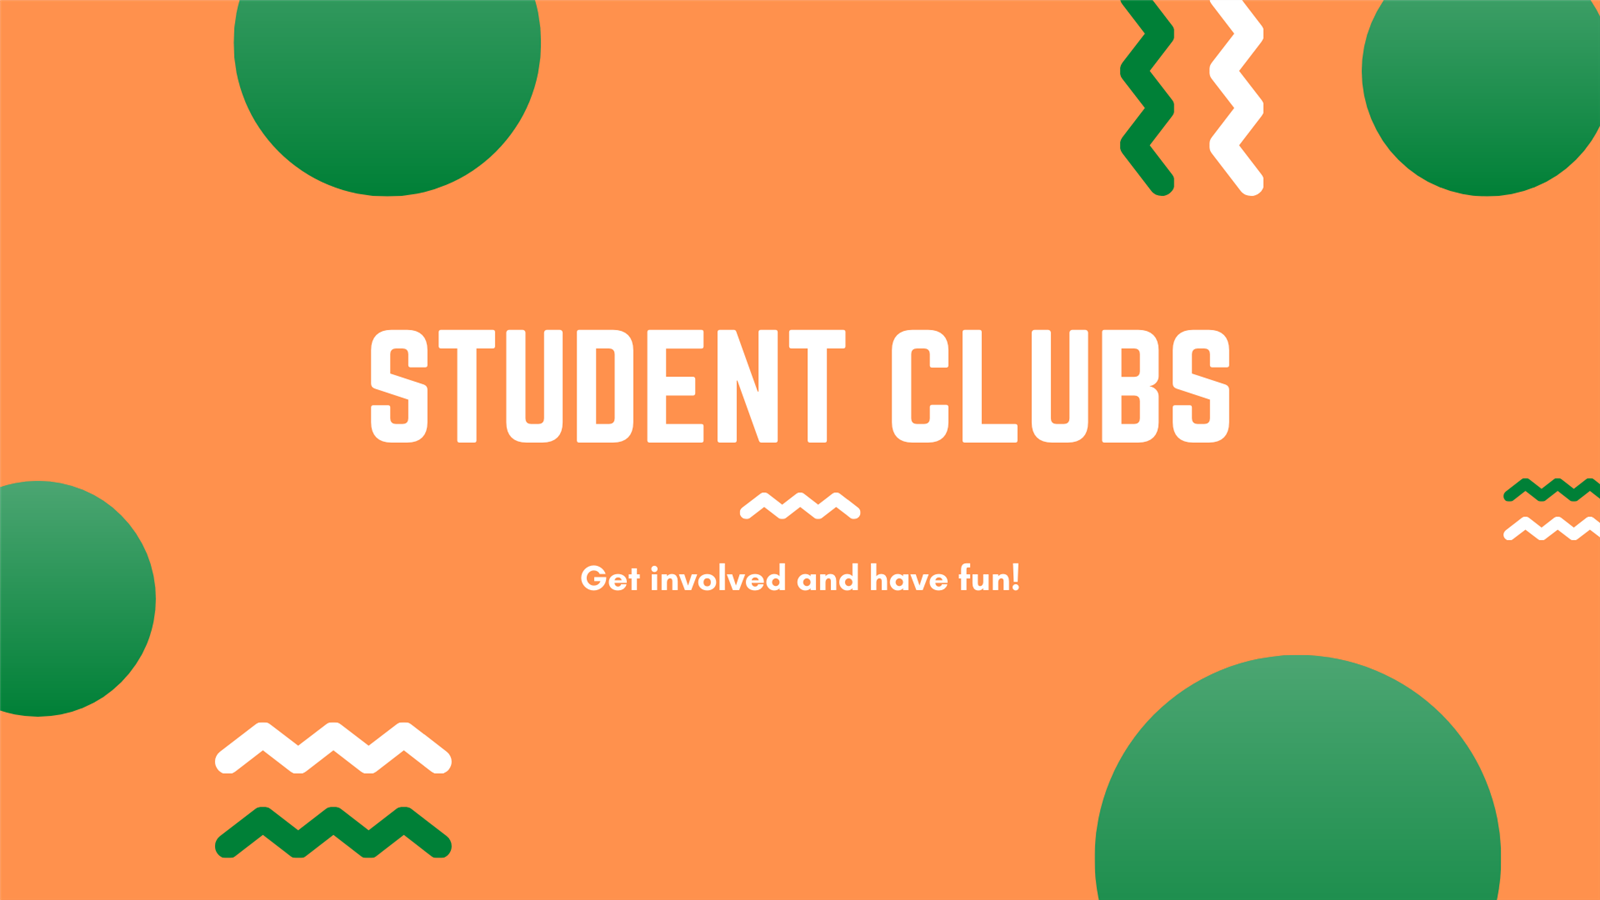 Student Clubs - Get involved and have fun!